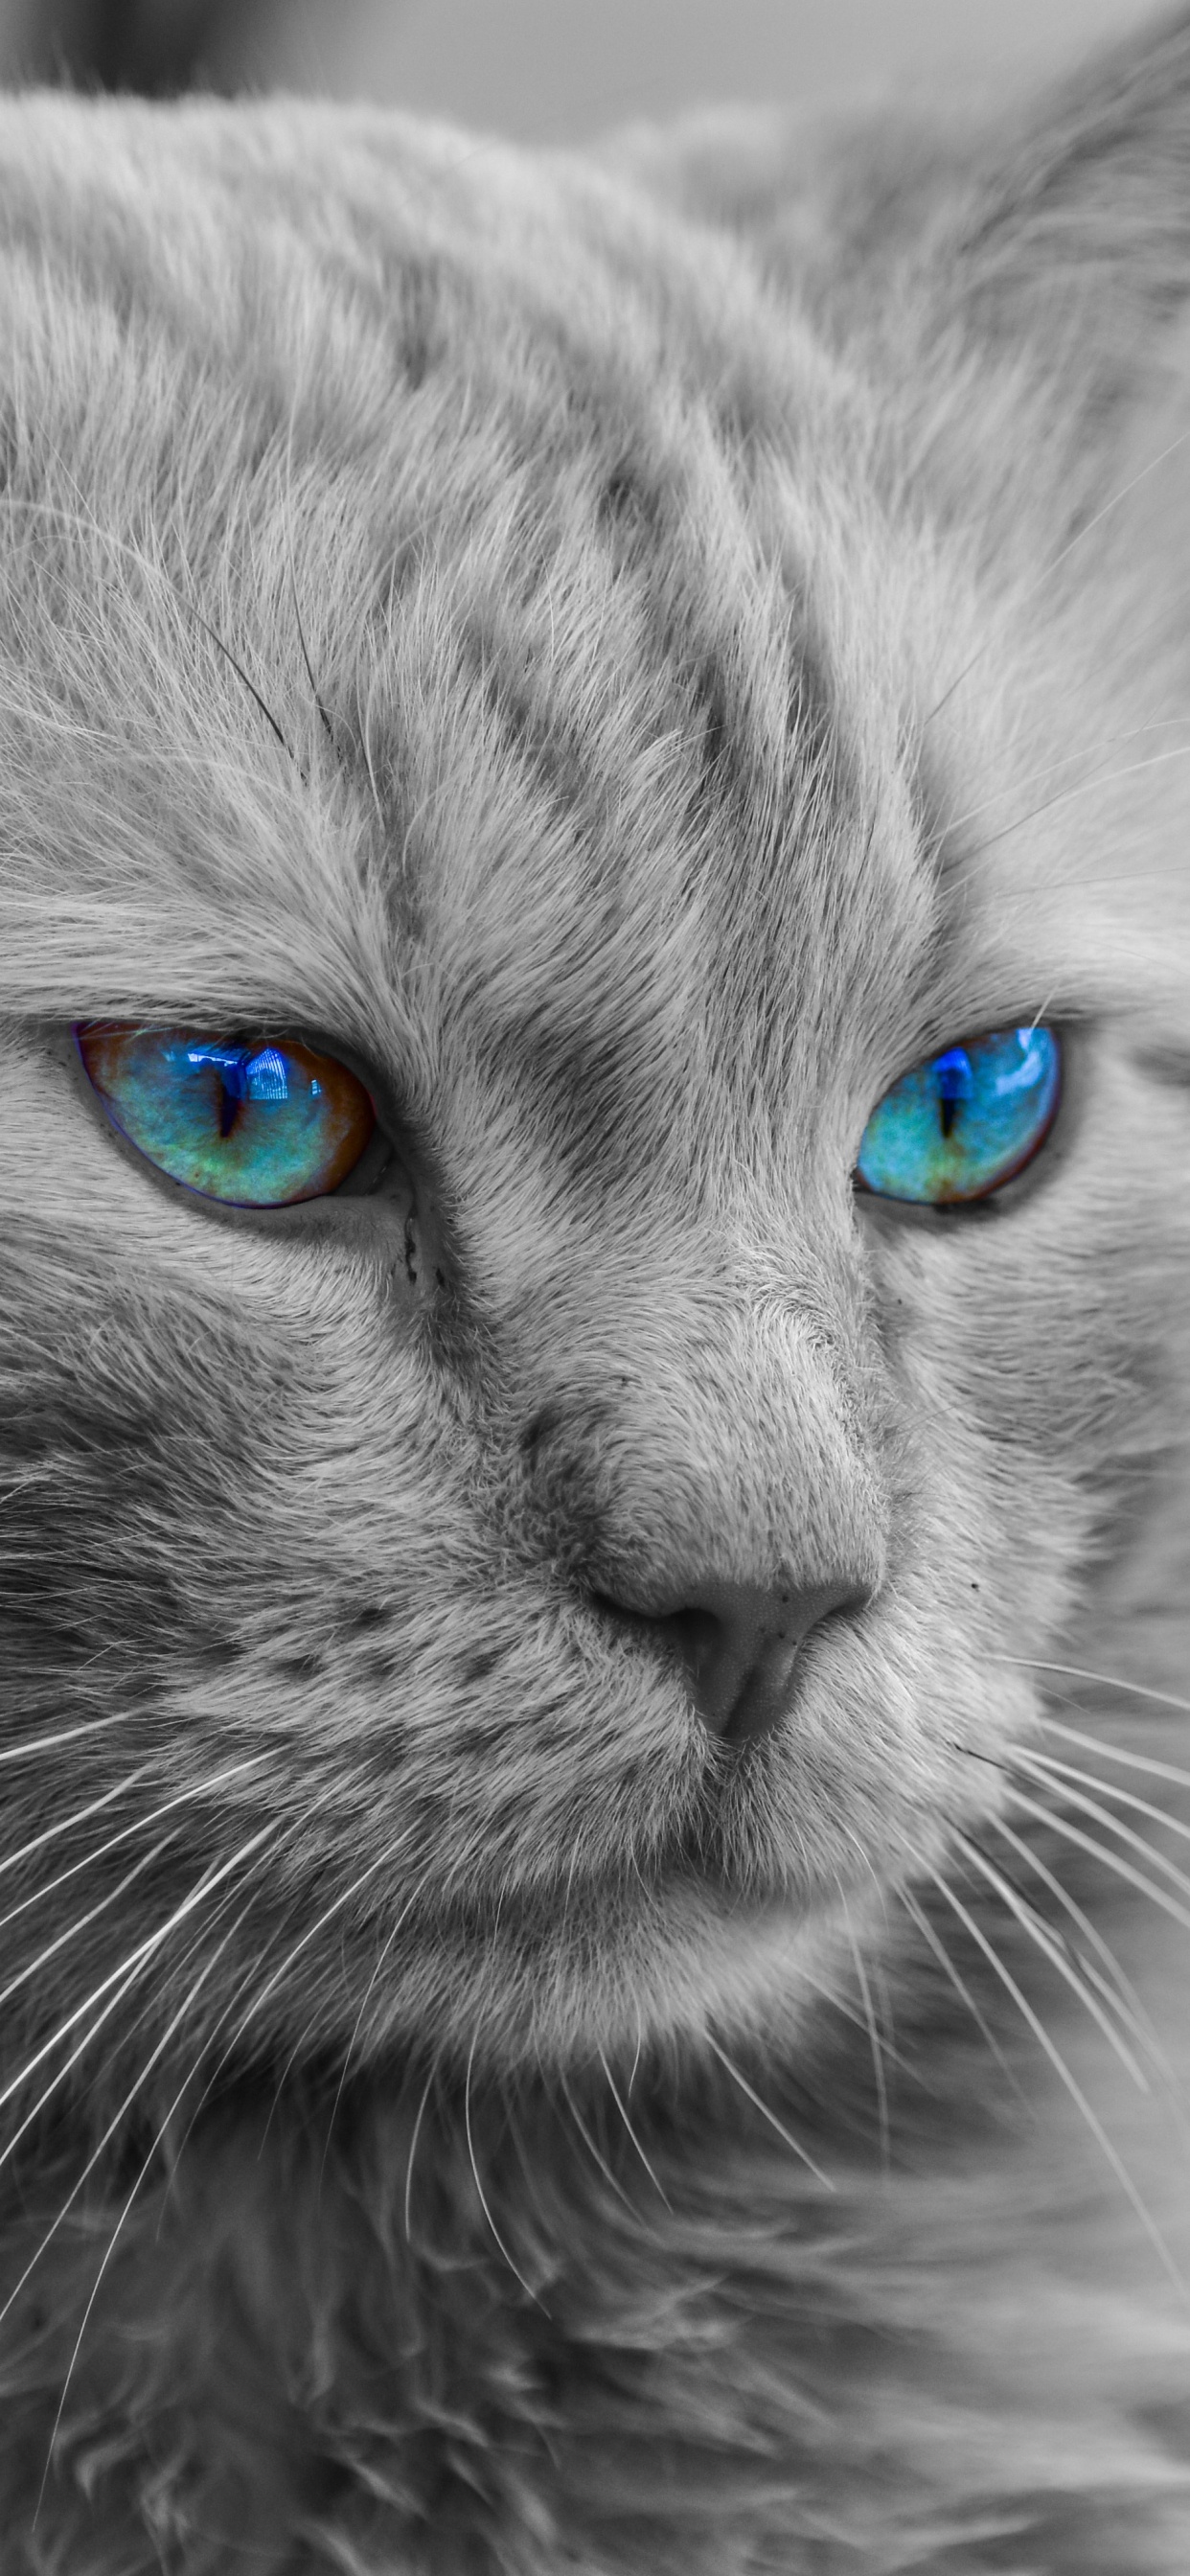 Grayscale Photo of Cat With Blue Eyes. Wallpaper in 1242x2688 Resolution